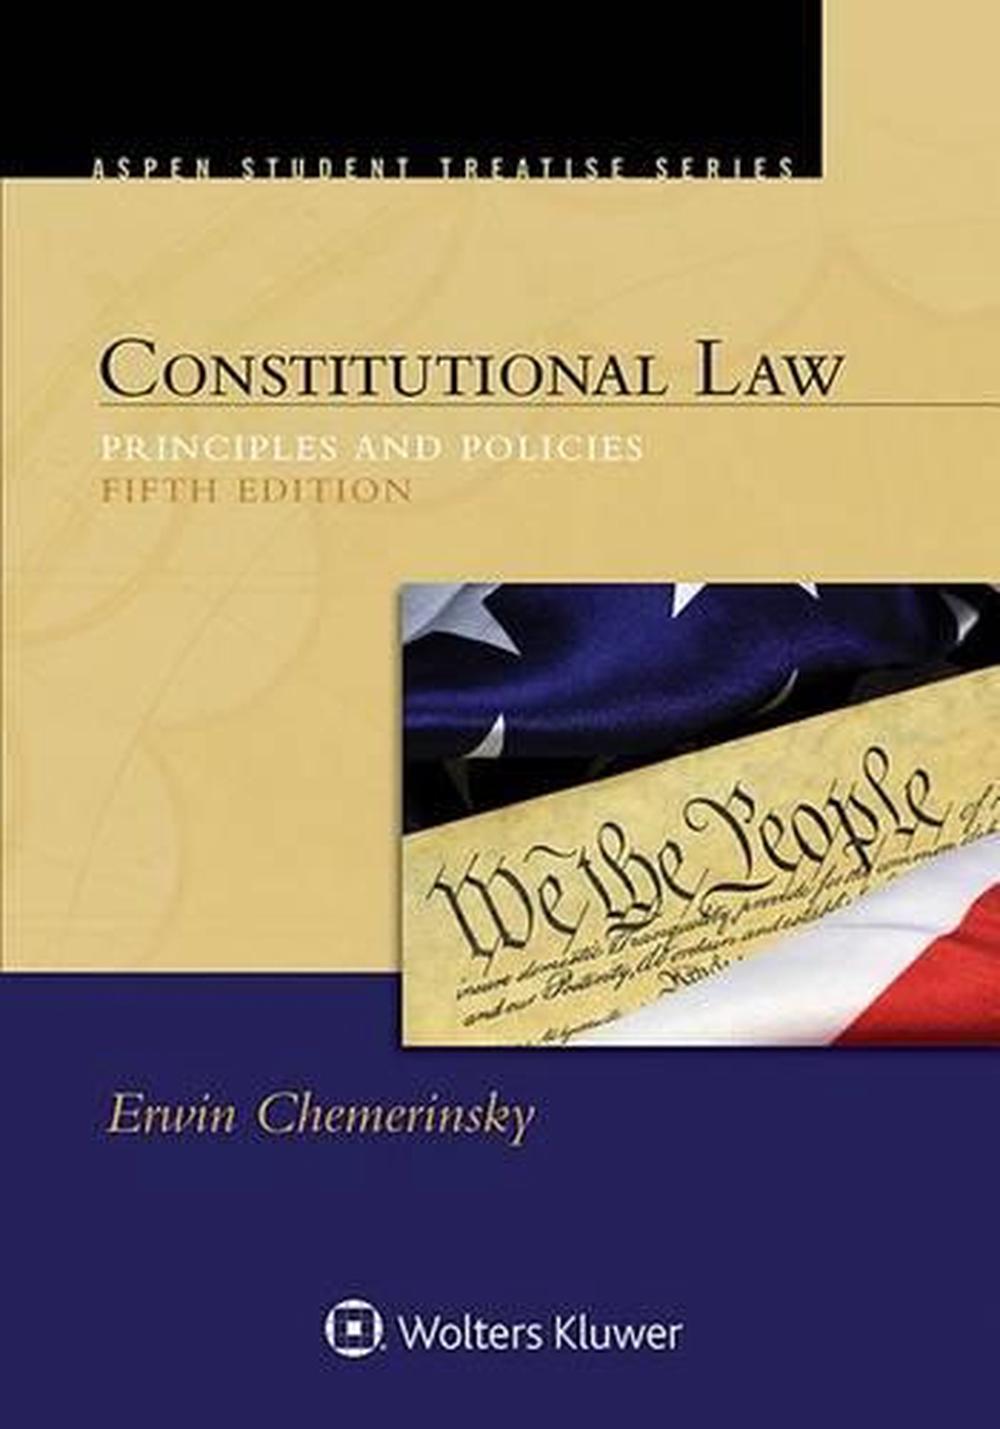 best topics for research paper on constitutional law